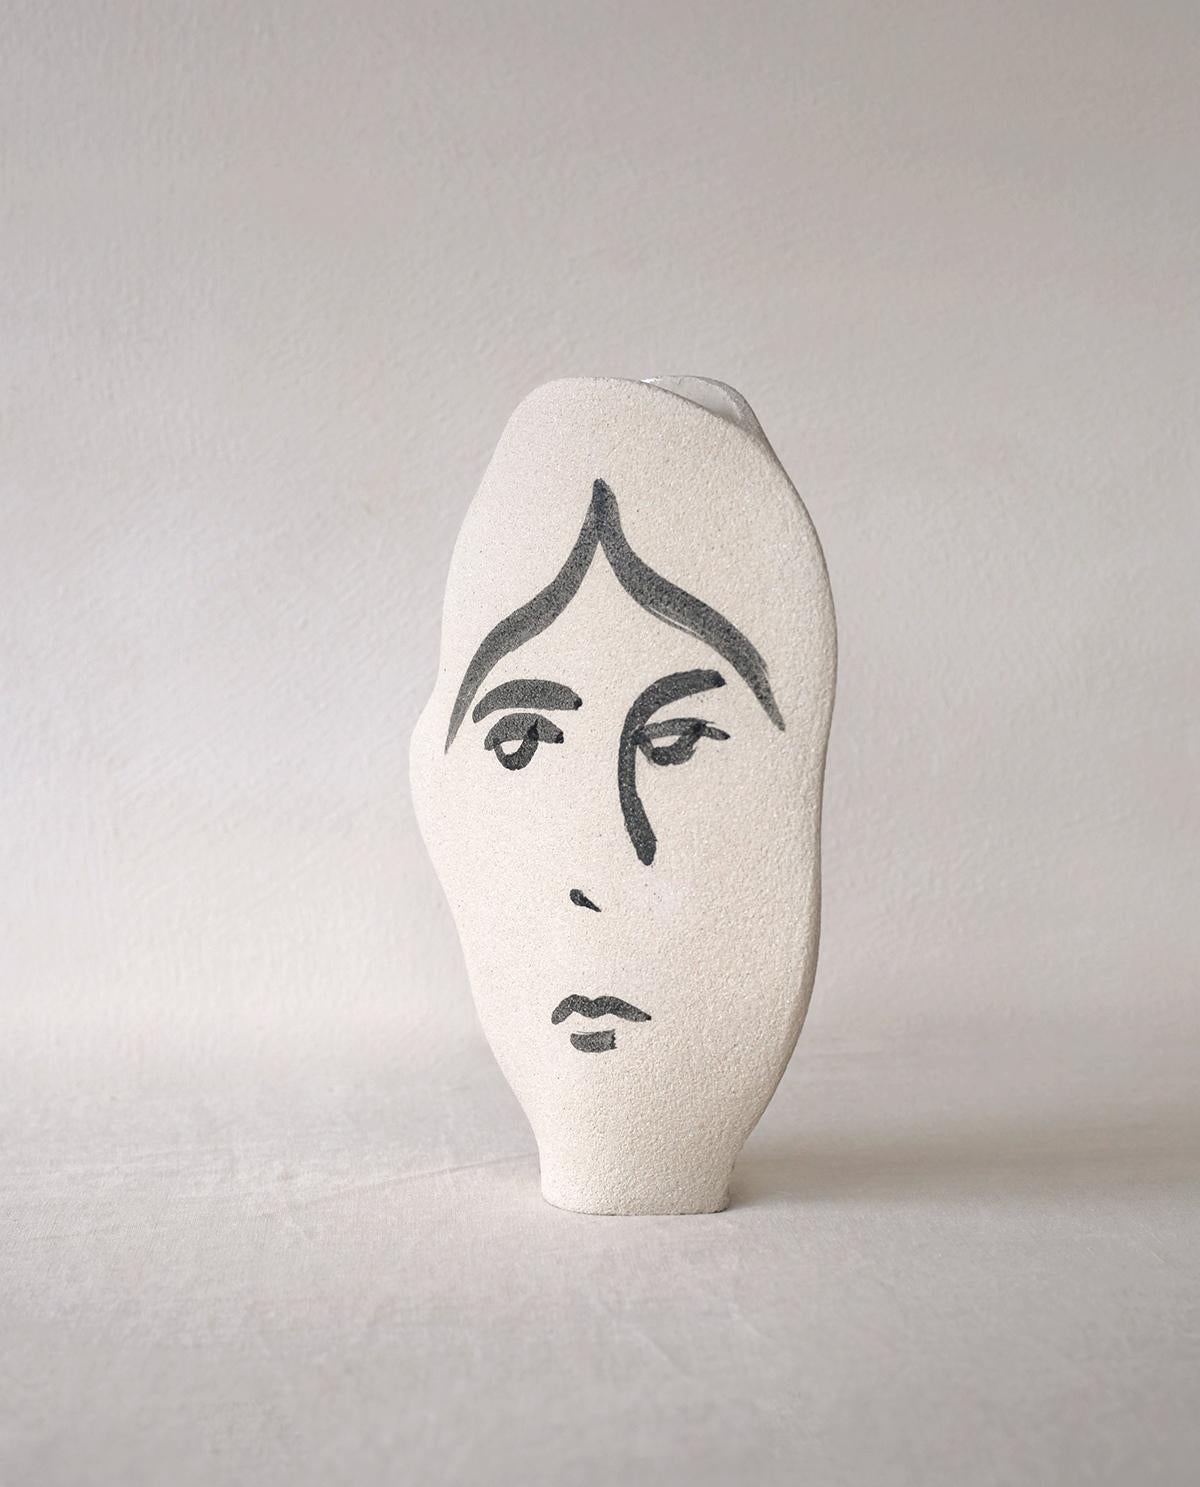 ‘Frida N°2’ Handmade Ceramic White Vase

This vase is part of a new series inspired by human faces and portrait illustrations. Here is a new shaped model, the ‘Frida N°2', with hand-painted figurative motifs applied with a brush before the first